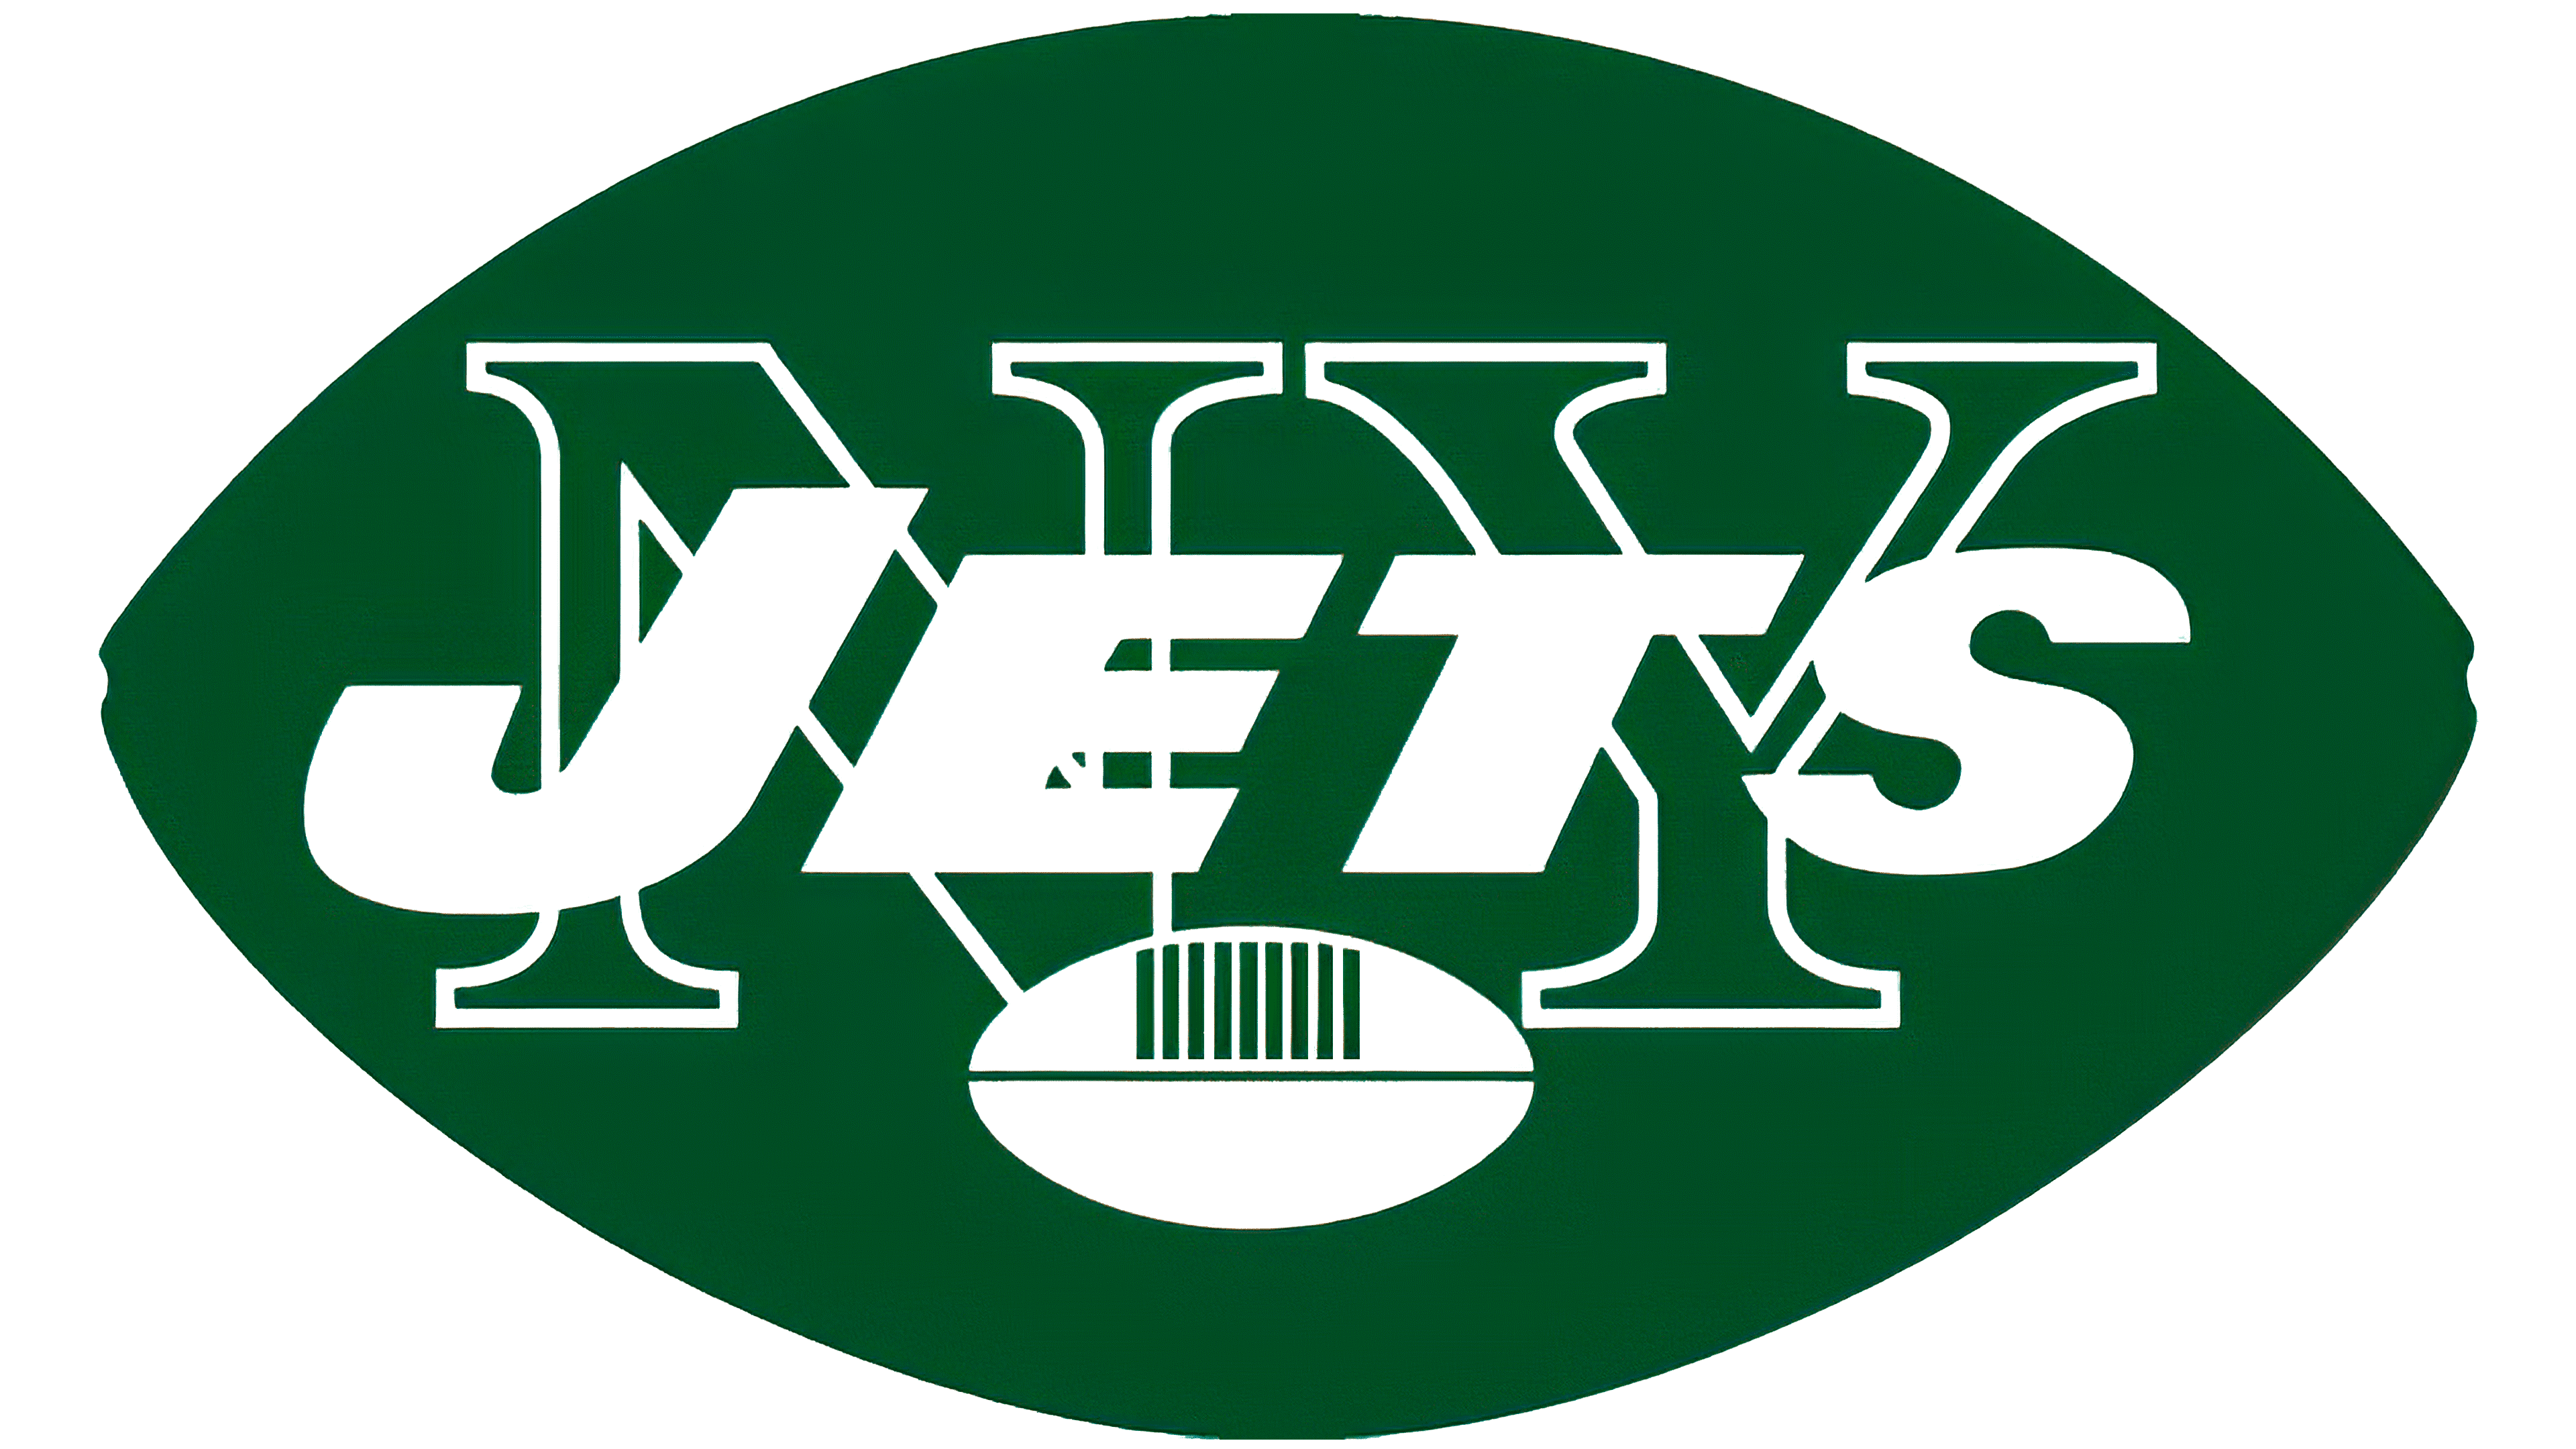 New York Jets Logo, meaning, history, PNG, SVG, vector